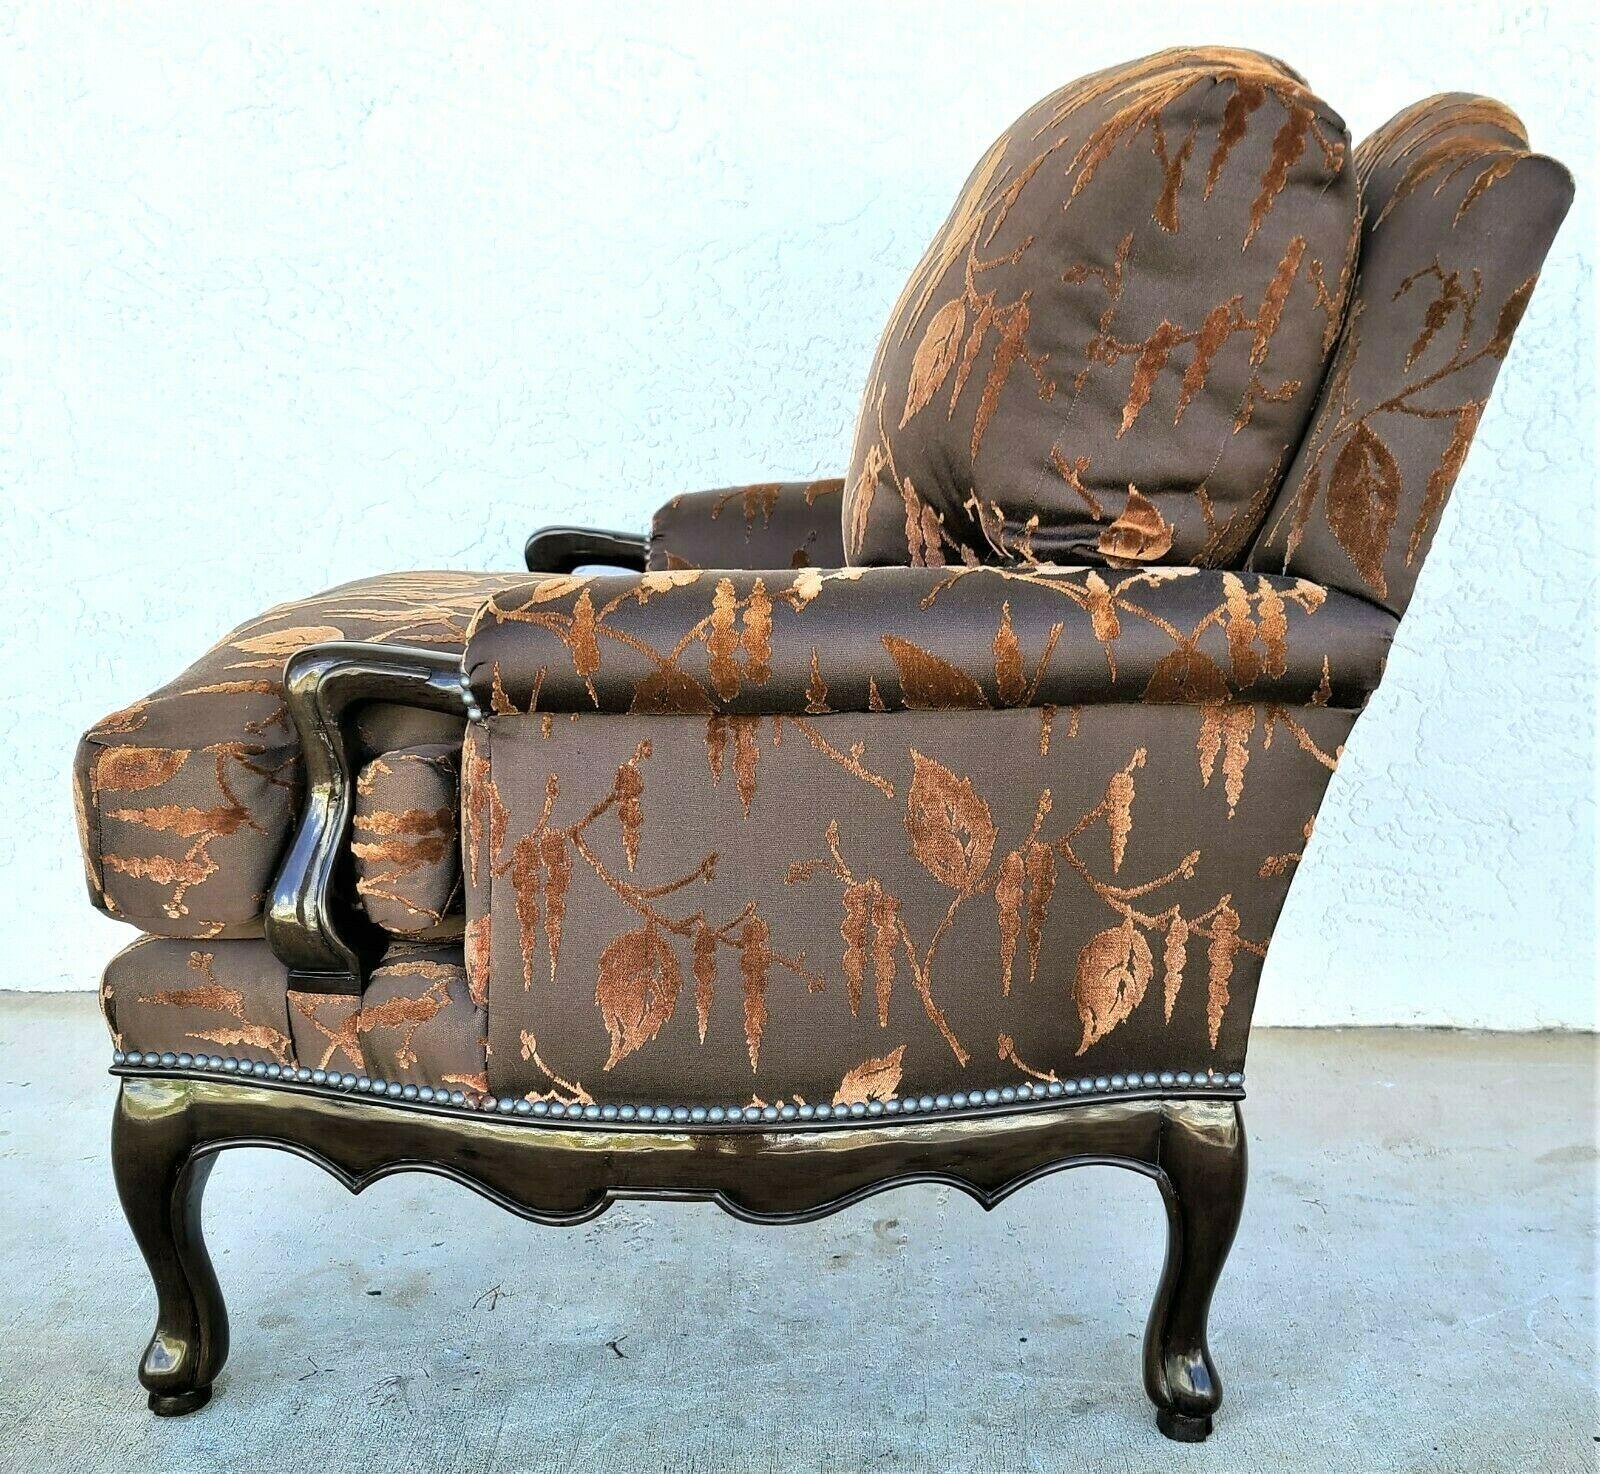 Offering One Of Our Recent Palm Beach Estate Fine Furniture Acquisitions Of A 
Wonderful Down Stuffed Velvet Leaves Goats Feet Lounge Chair by J ROBERT SCOTT
A beautiful, oversized, warm, and inviting lounge chair with burnout velvet fabric and